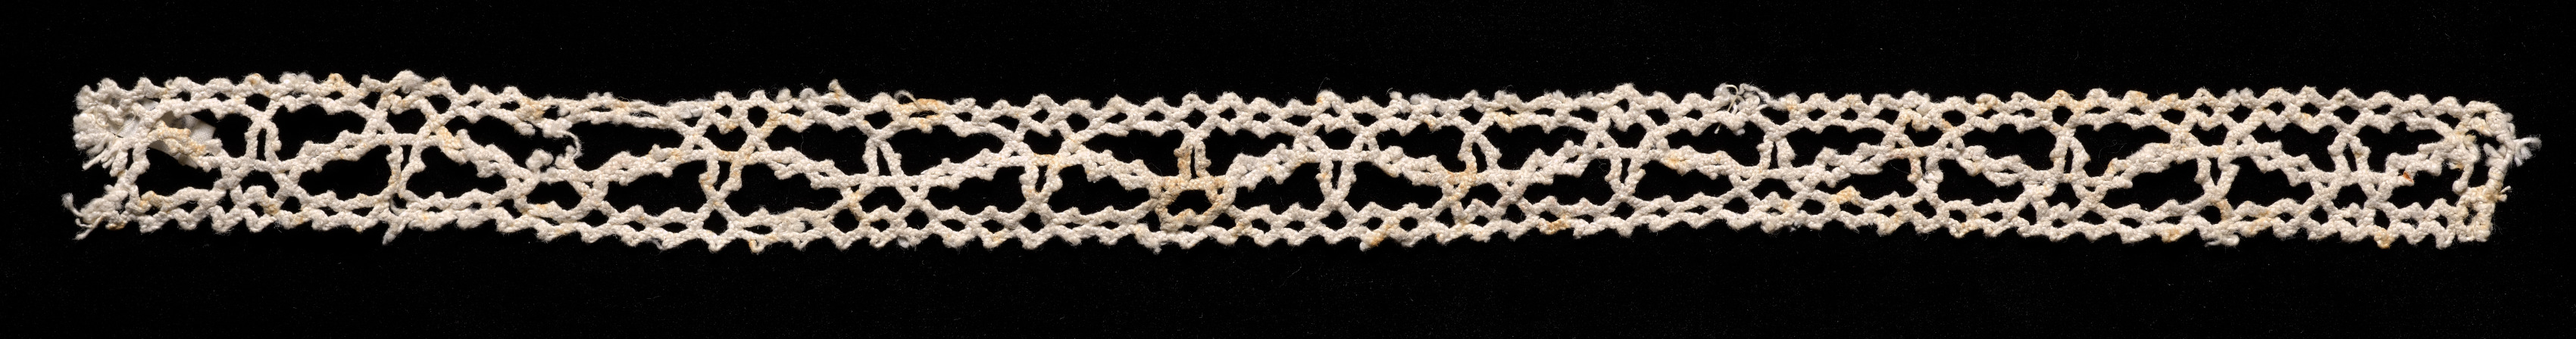 Bobbin Lace Insertion without Selvage